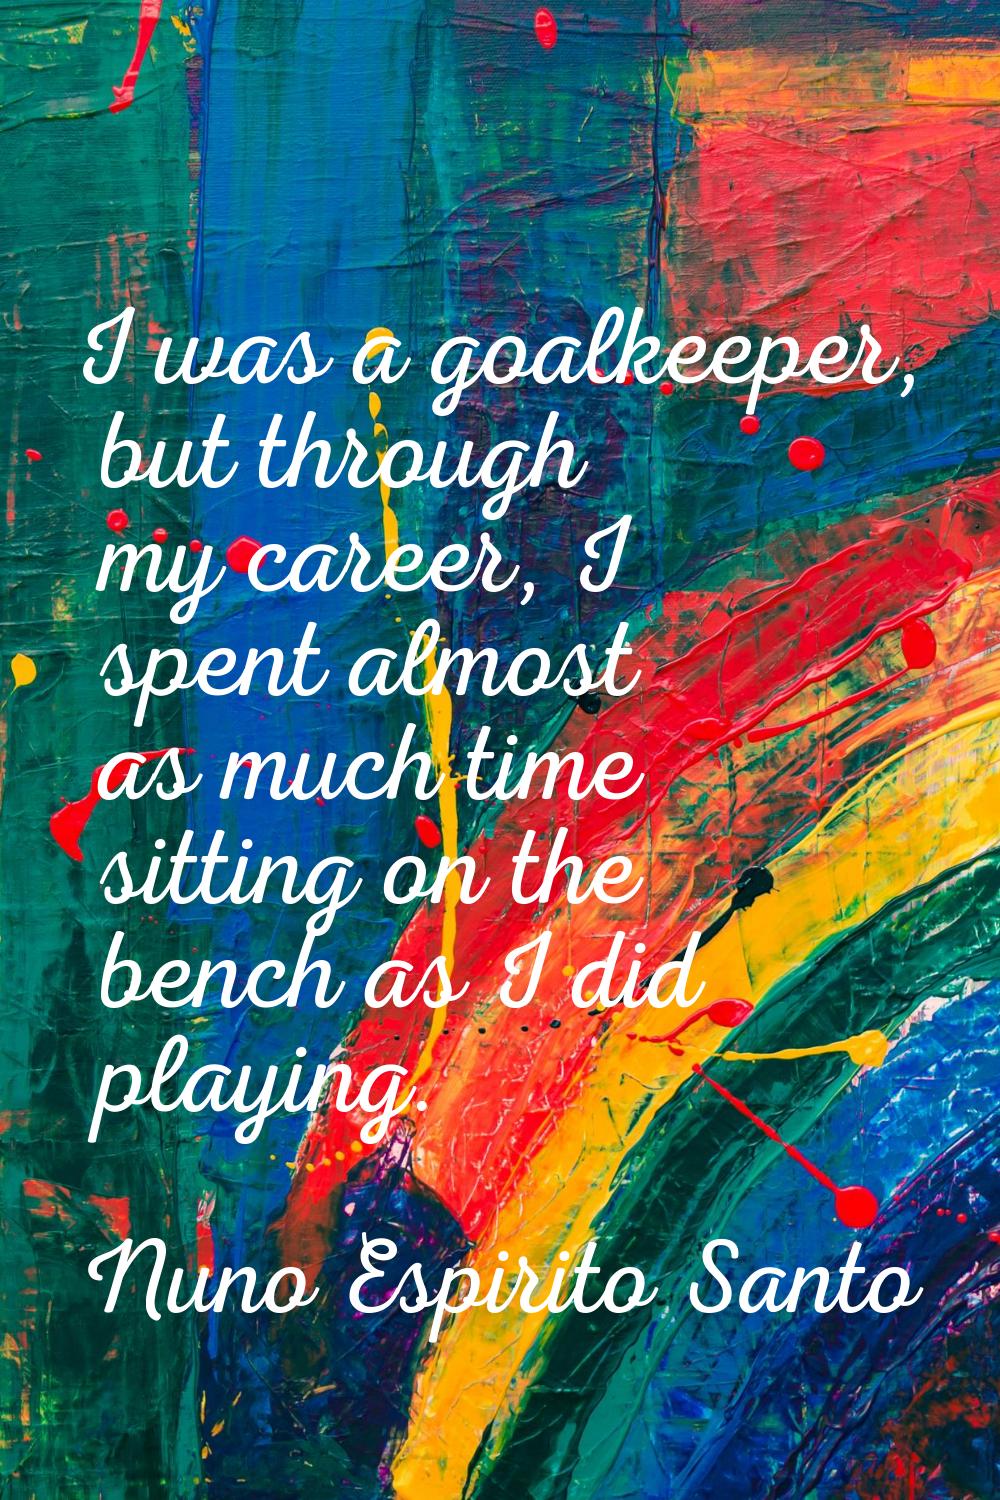 I was a goalkeeper, but through my career, I spent almost as much time sitting on the bench as I di